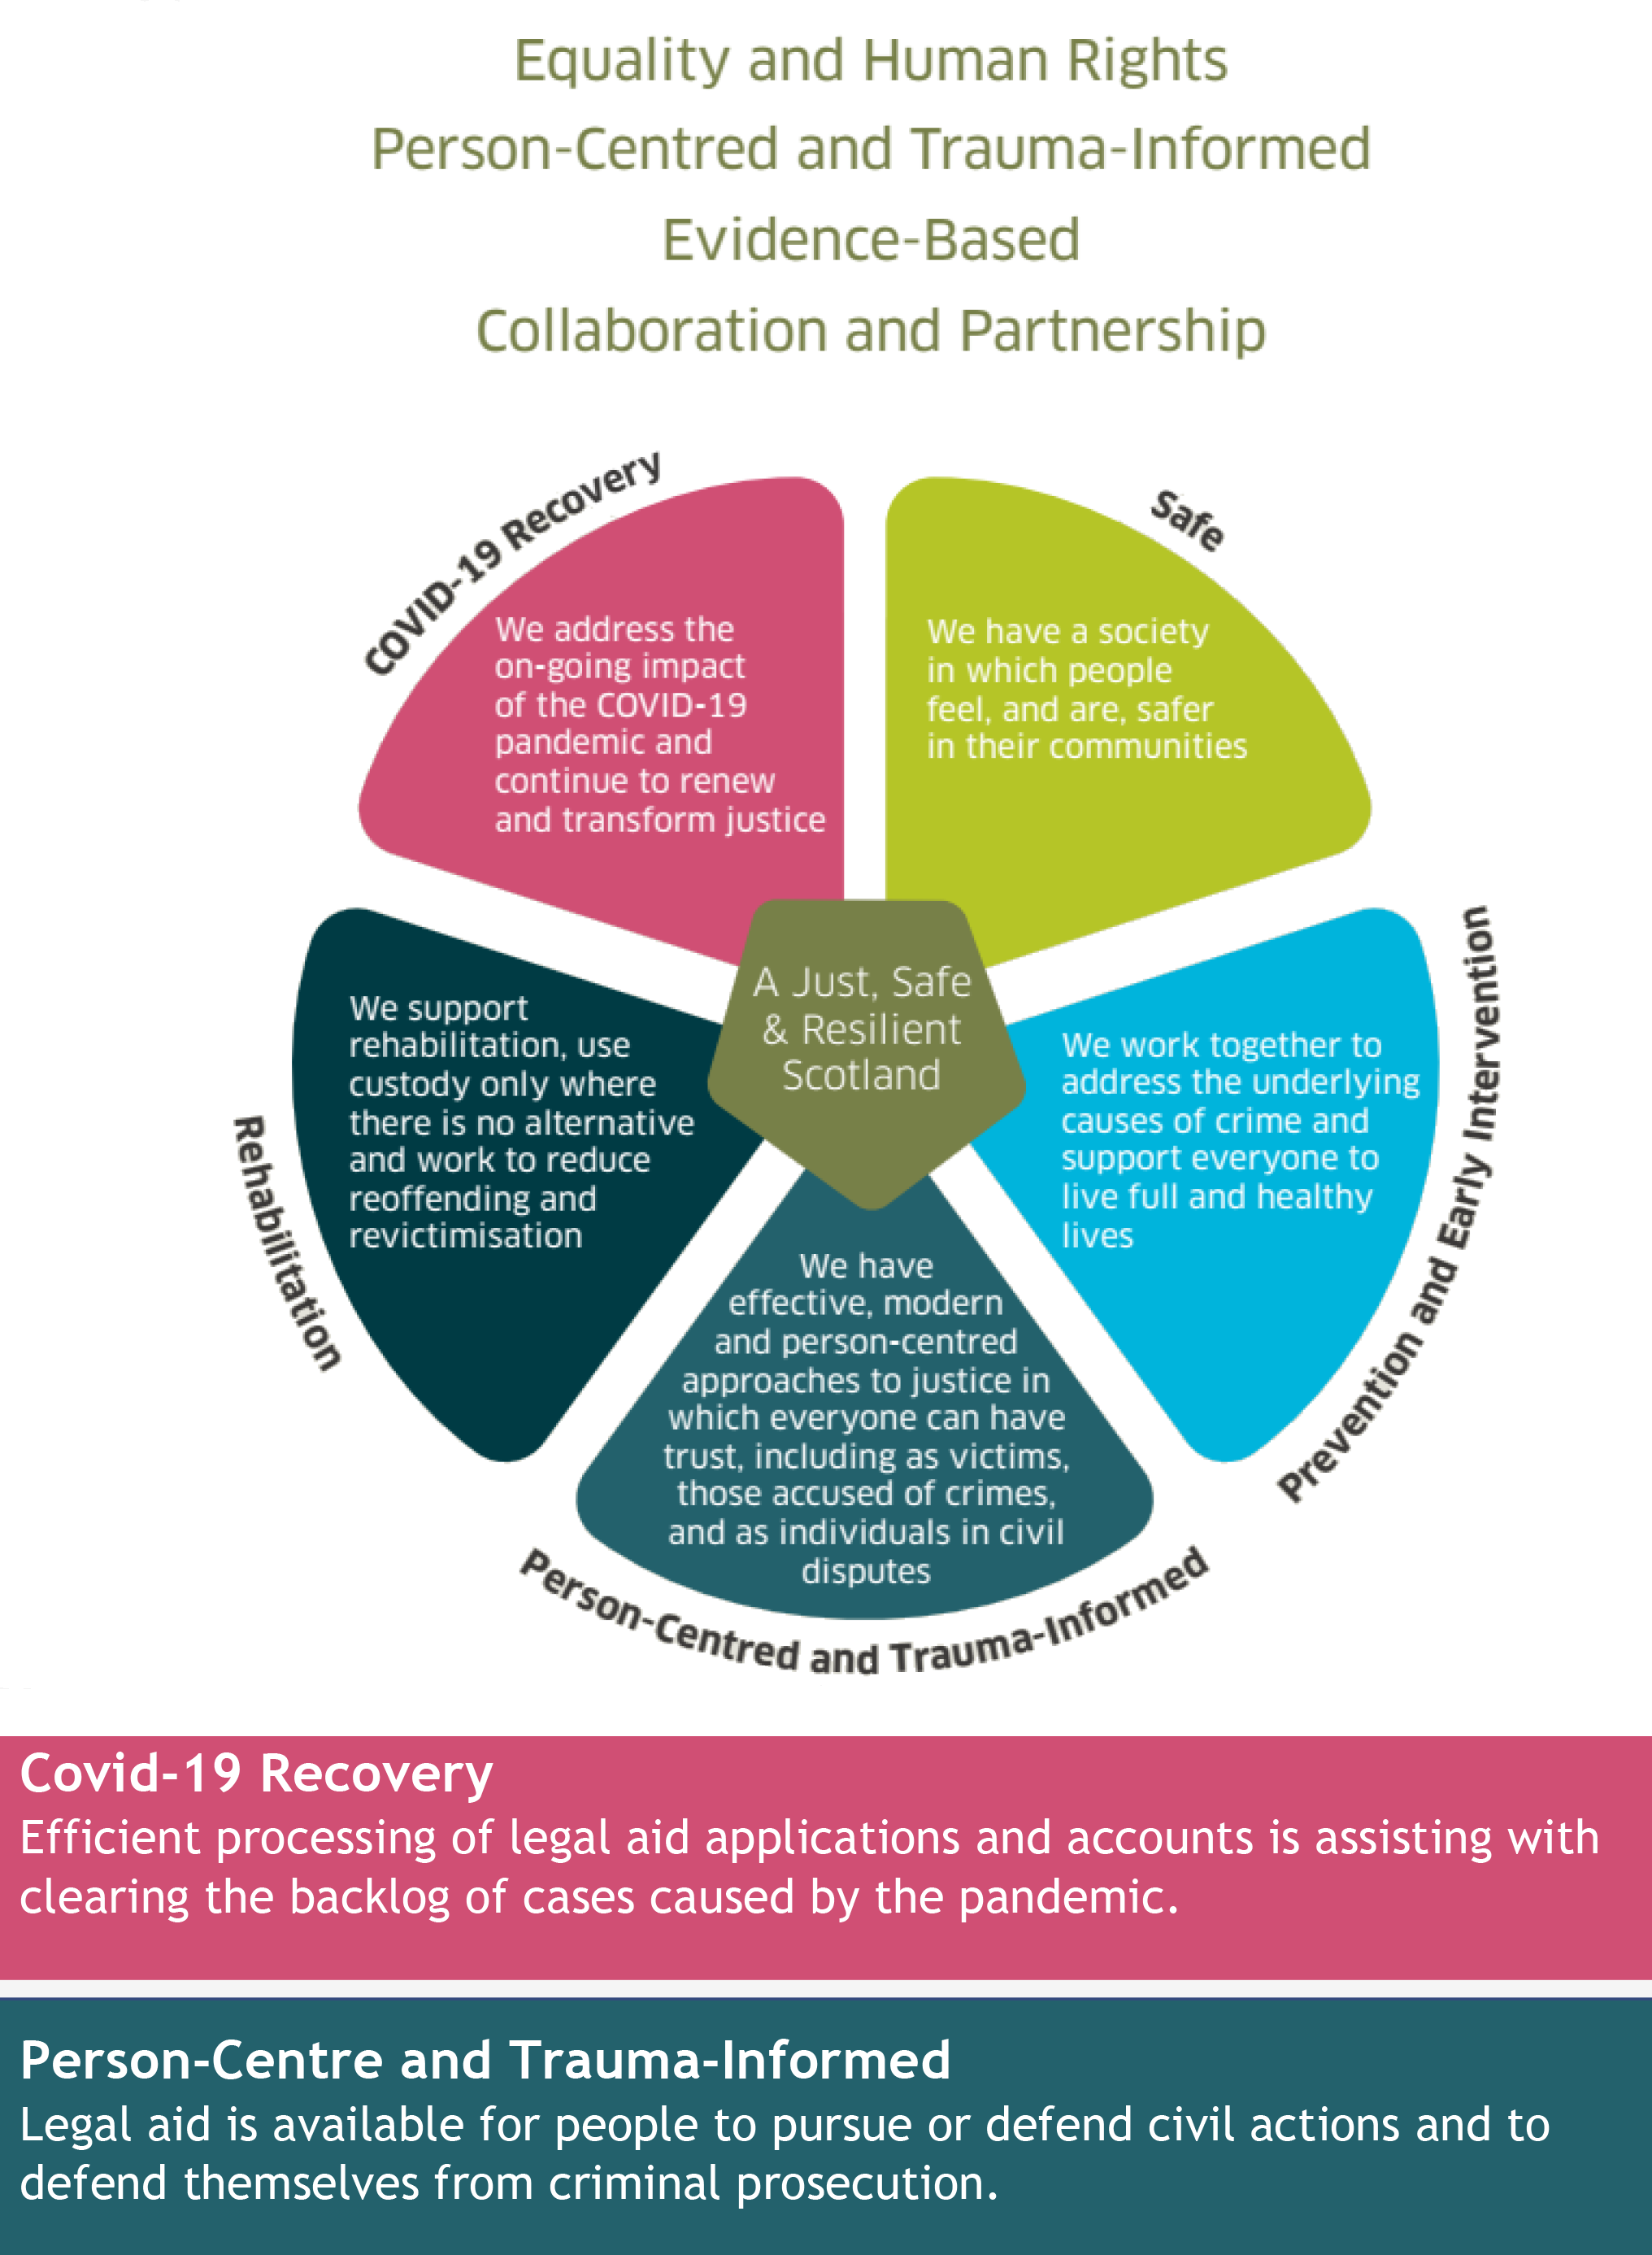 Visual of Scottish Government National Performance Framework highlighting Equality and Human Rights Person-Centred and Trauma-Informed Evidence-Based Collaboration and Partnership.